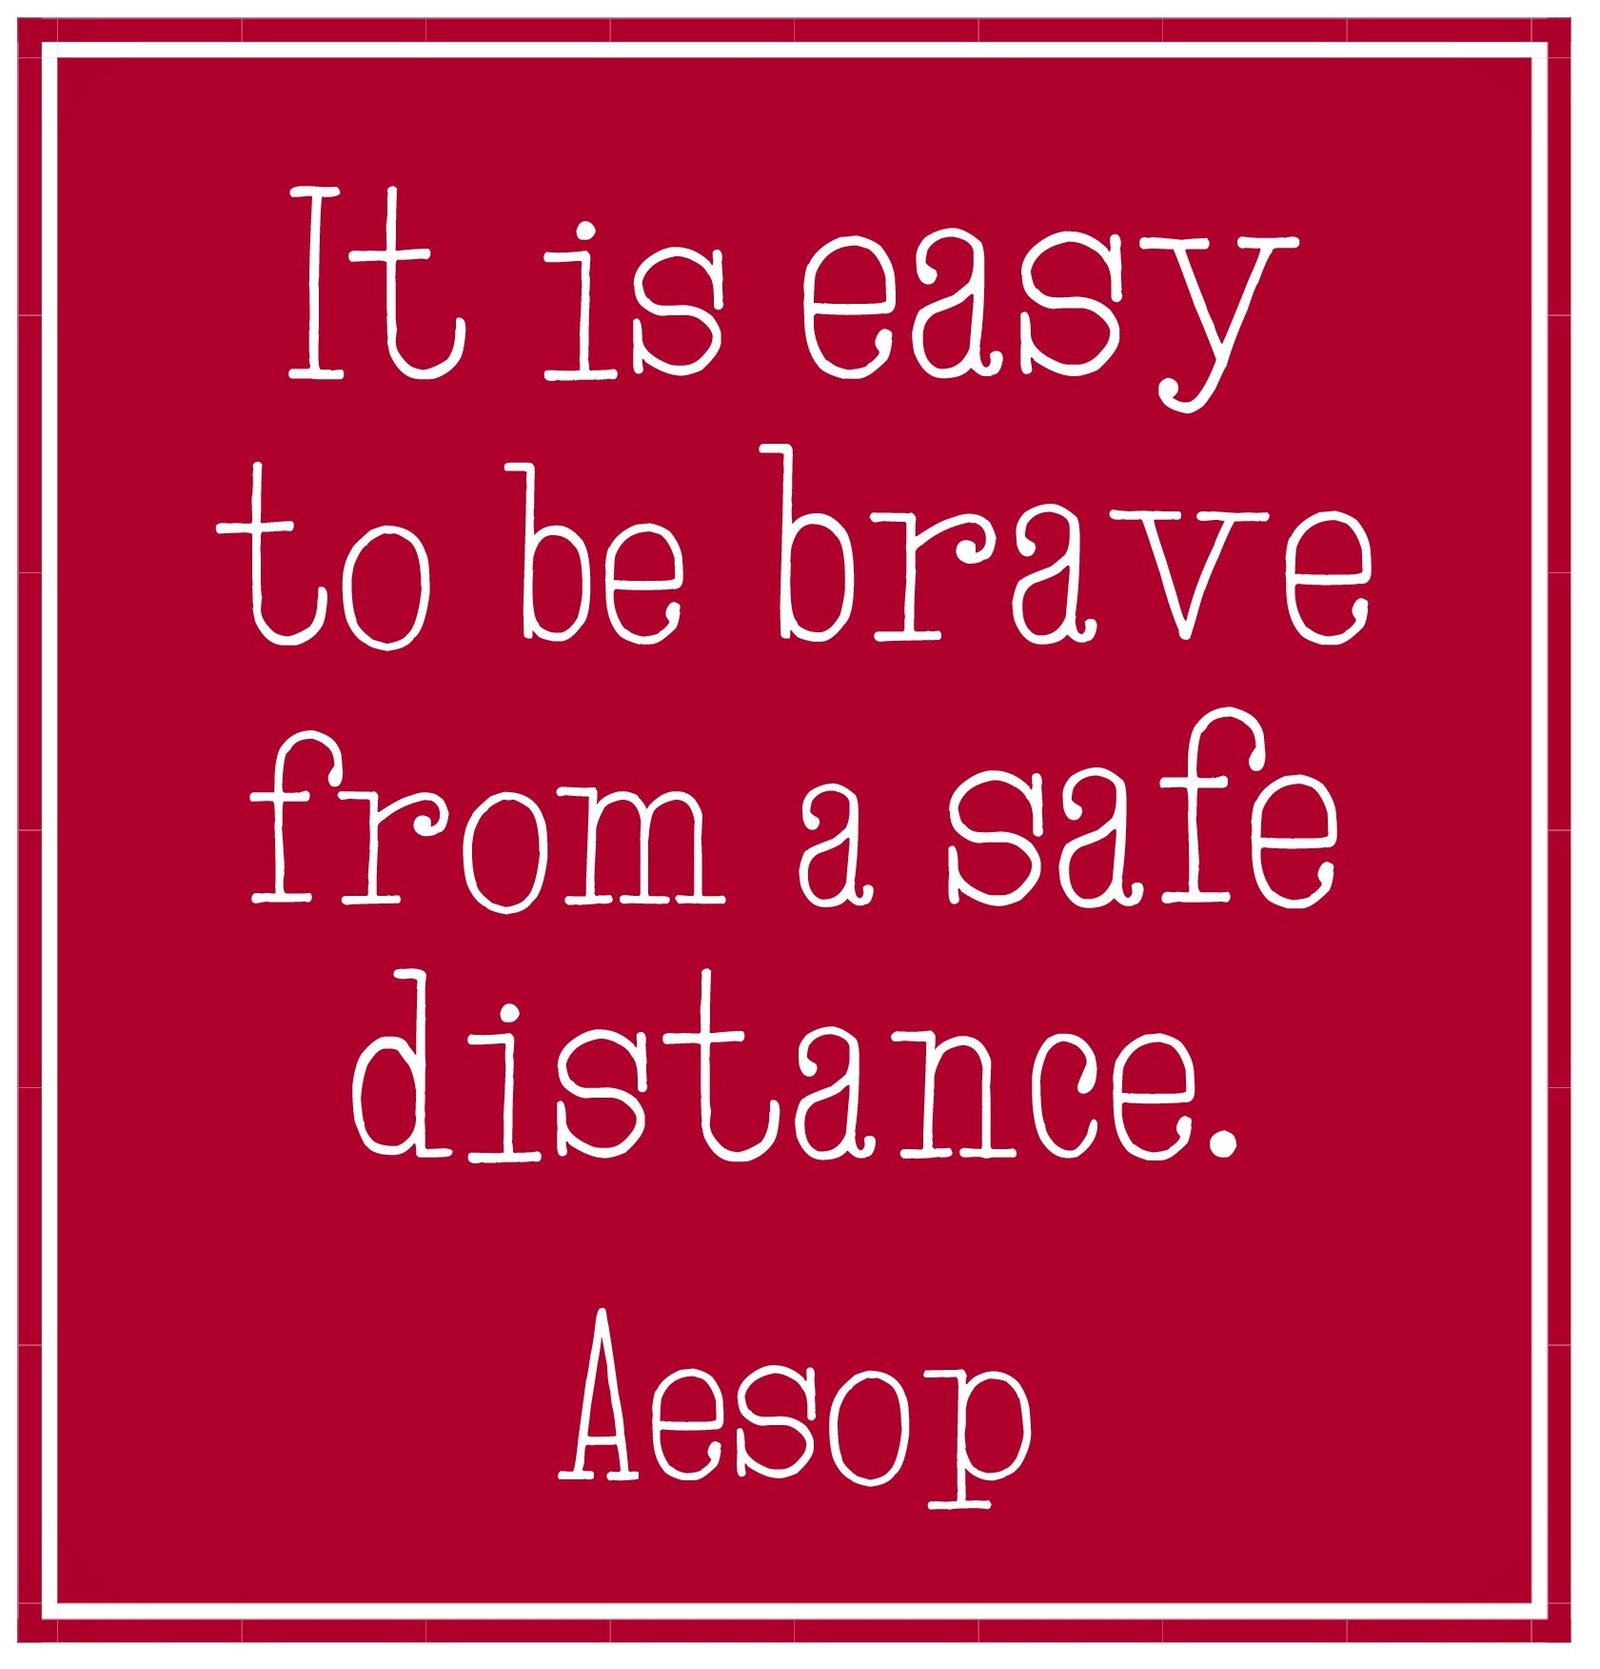 It is easy to be brave from a safe distance